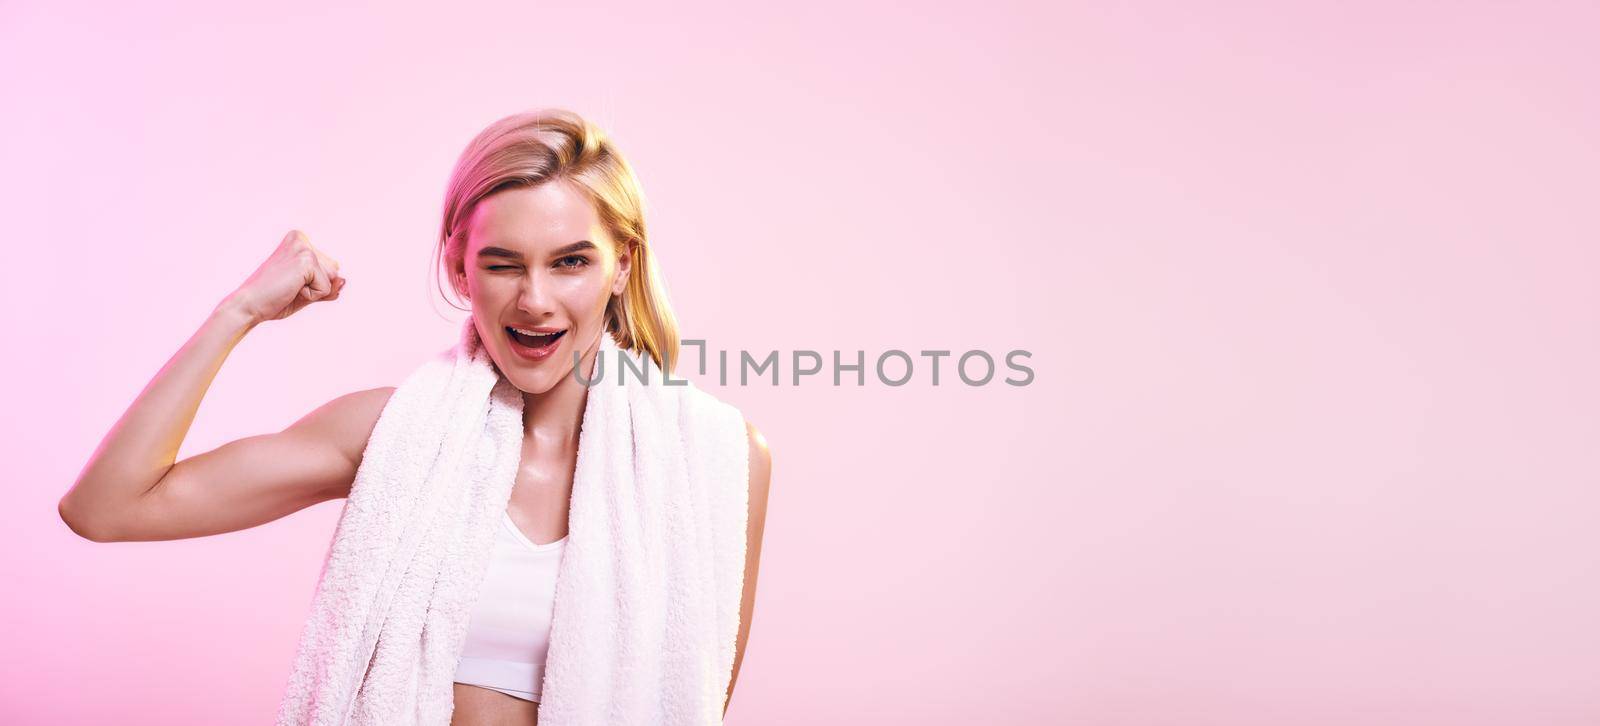 Strength and motivation. Cute and young sporty woman showing her bicep and smiling while standing against pink background. Web banner by friendsstock